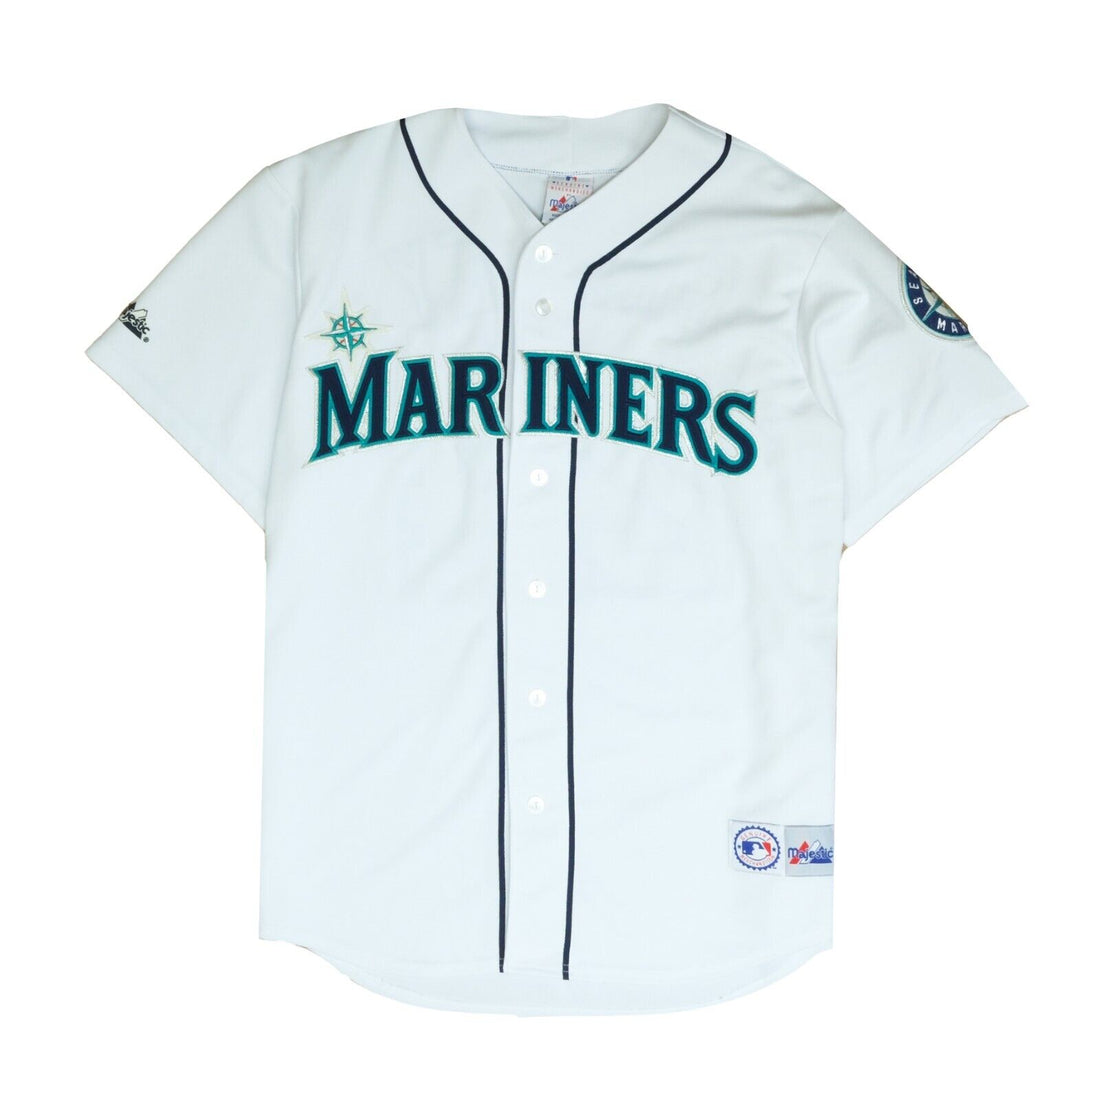 100% Authentic Ken Griffey Jr Mitchell & Ness 1995 Mariners Jersey Size 48  XL